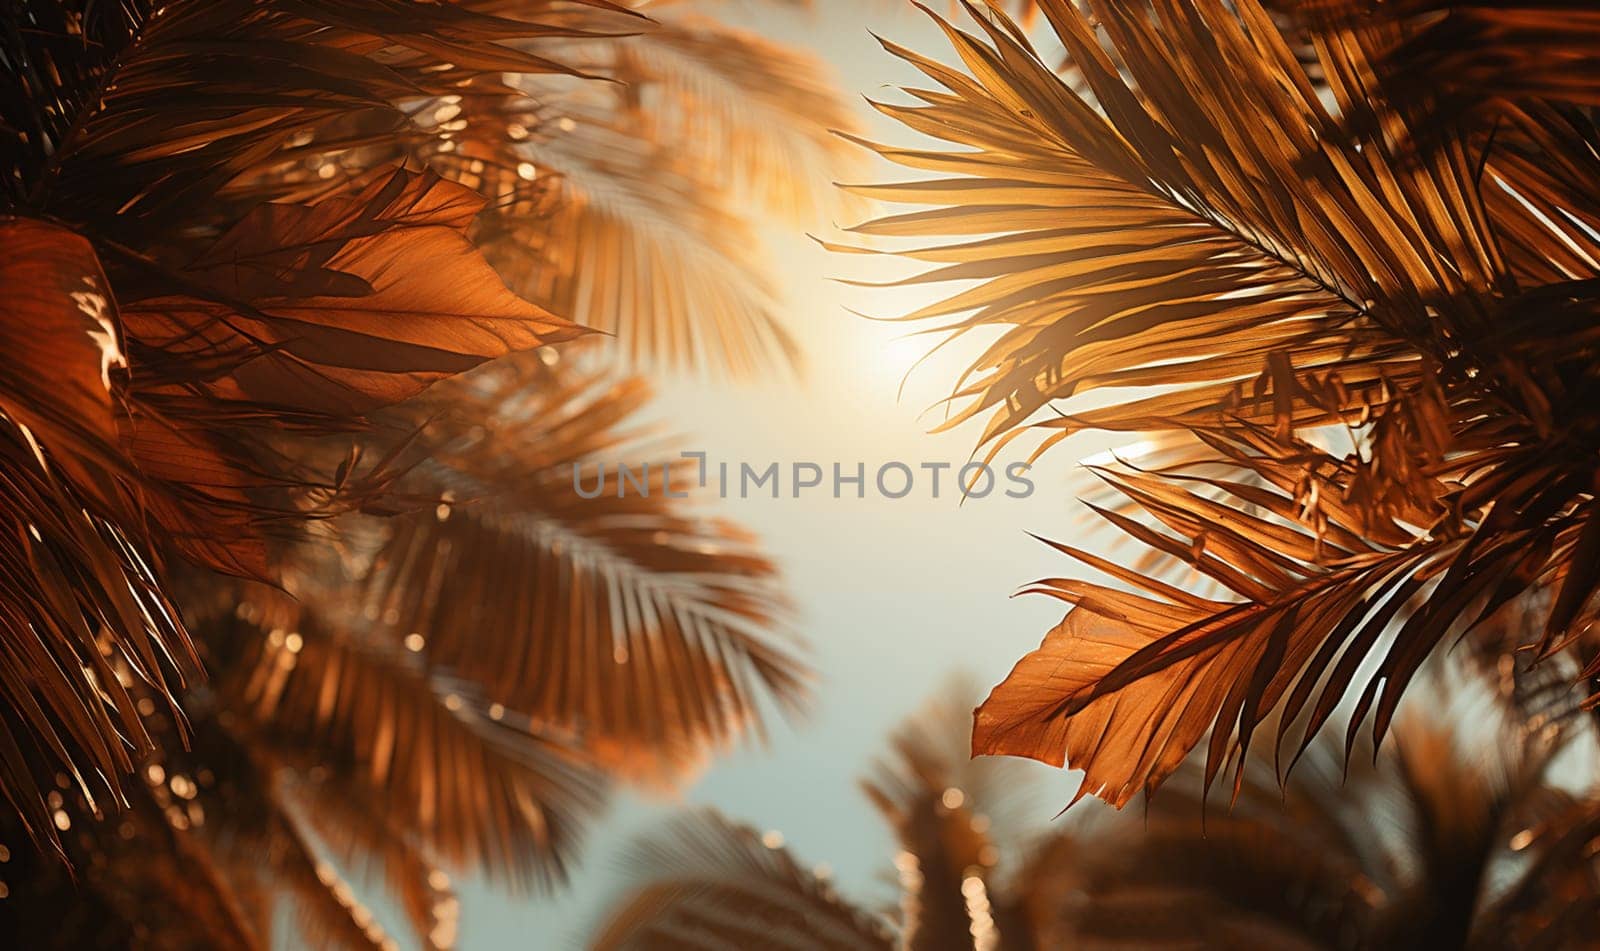 Palm leaves oin the sky with sepia tones.Palm tree with coconut, retro style photo. Summer travel destination. Fluffy palm leaf on sunset sky. Romantic honeymoon or holiday banner template. Coco palm crown view from ground. Tropical nature copy space by Annebel146